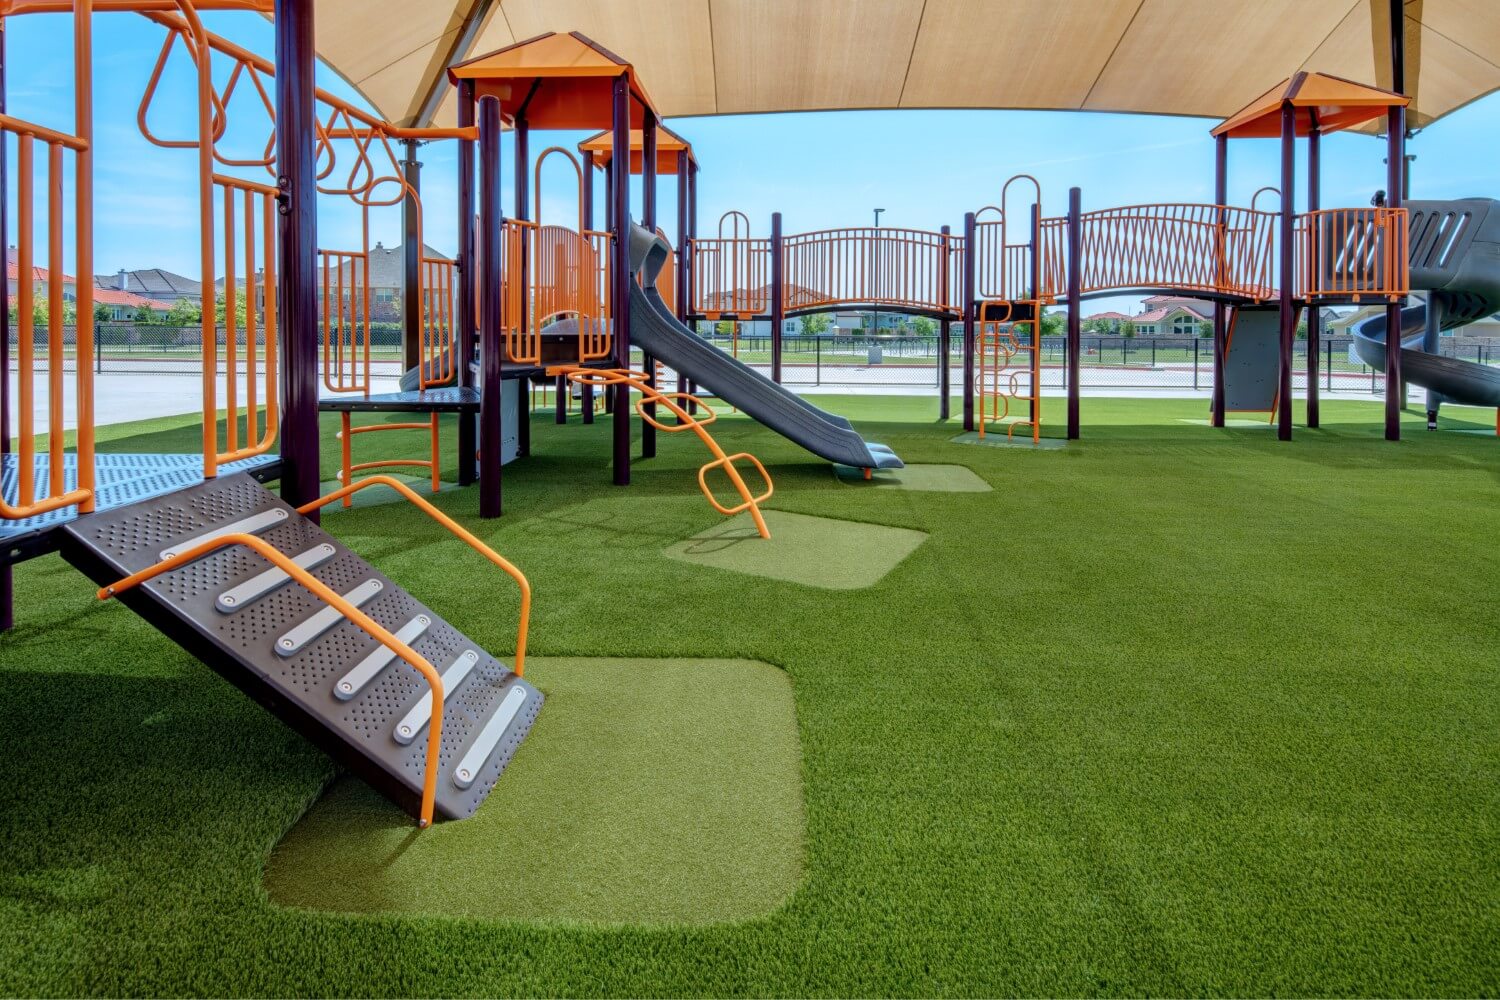 Junglegym installed on artificial grass from SYNLawn